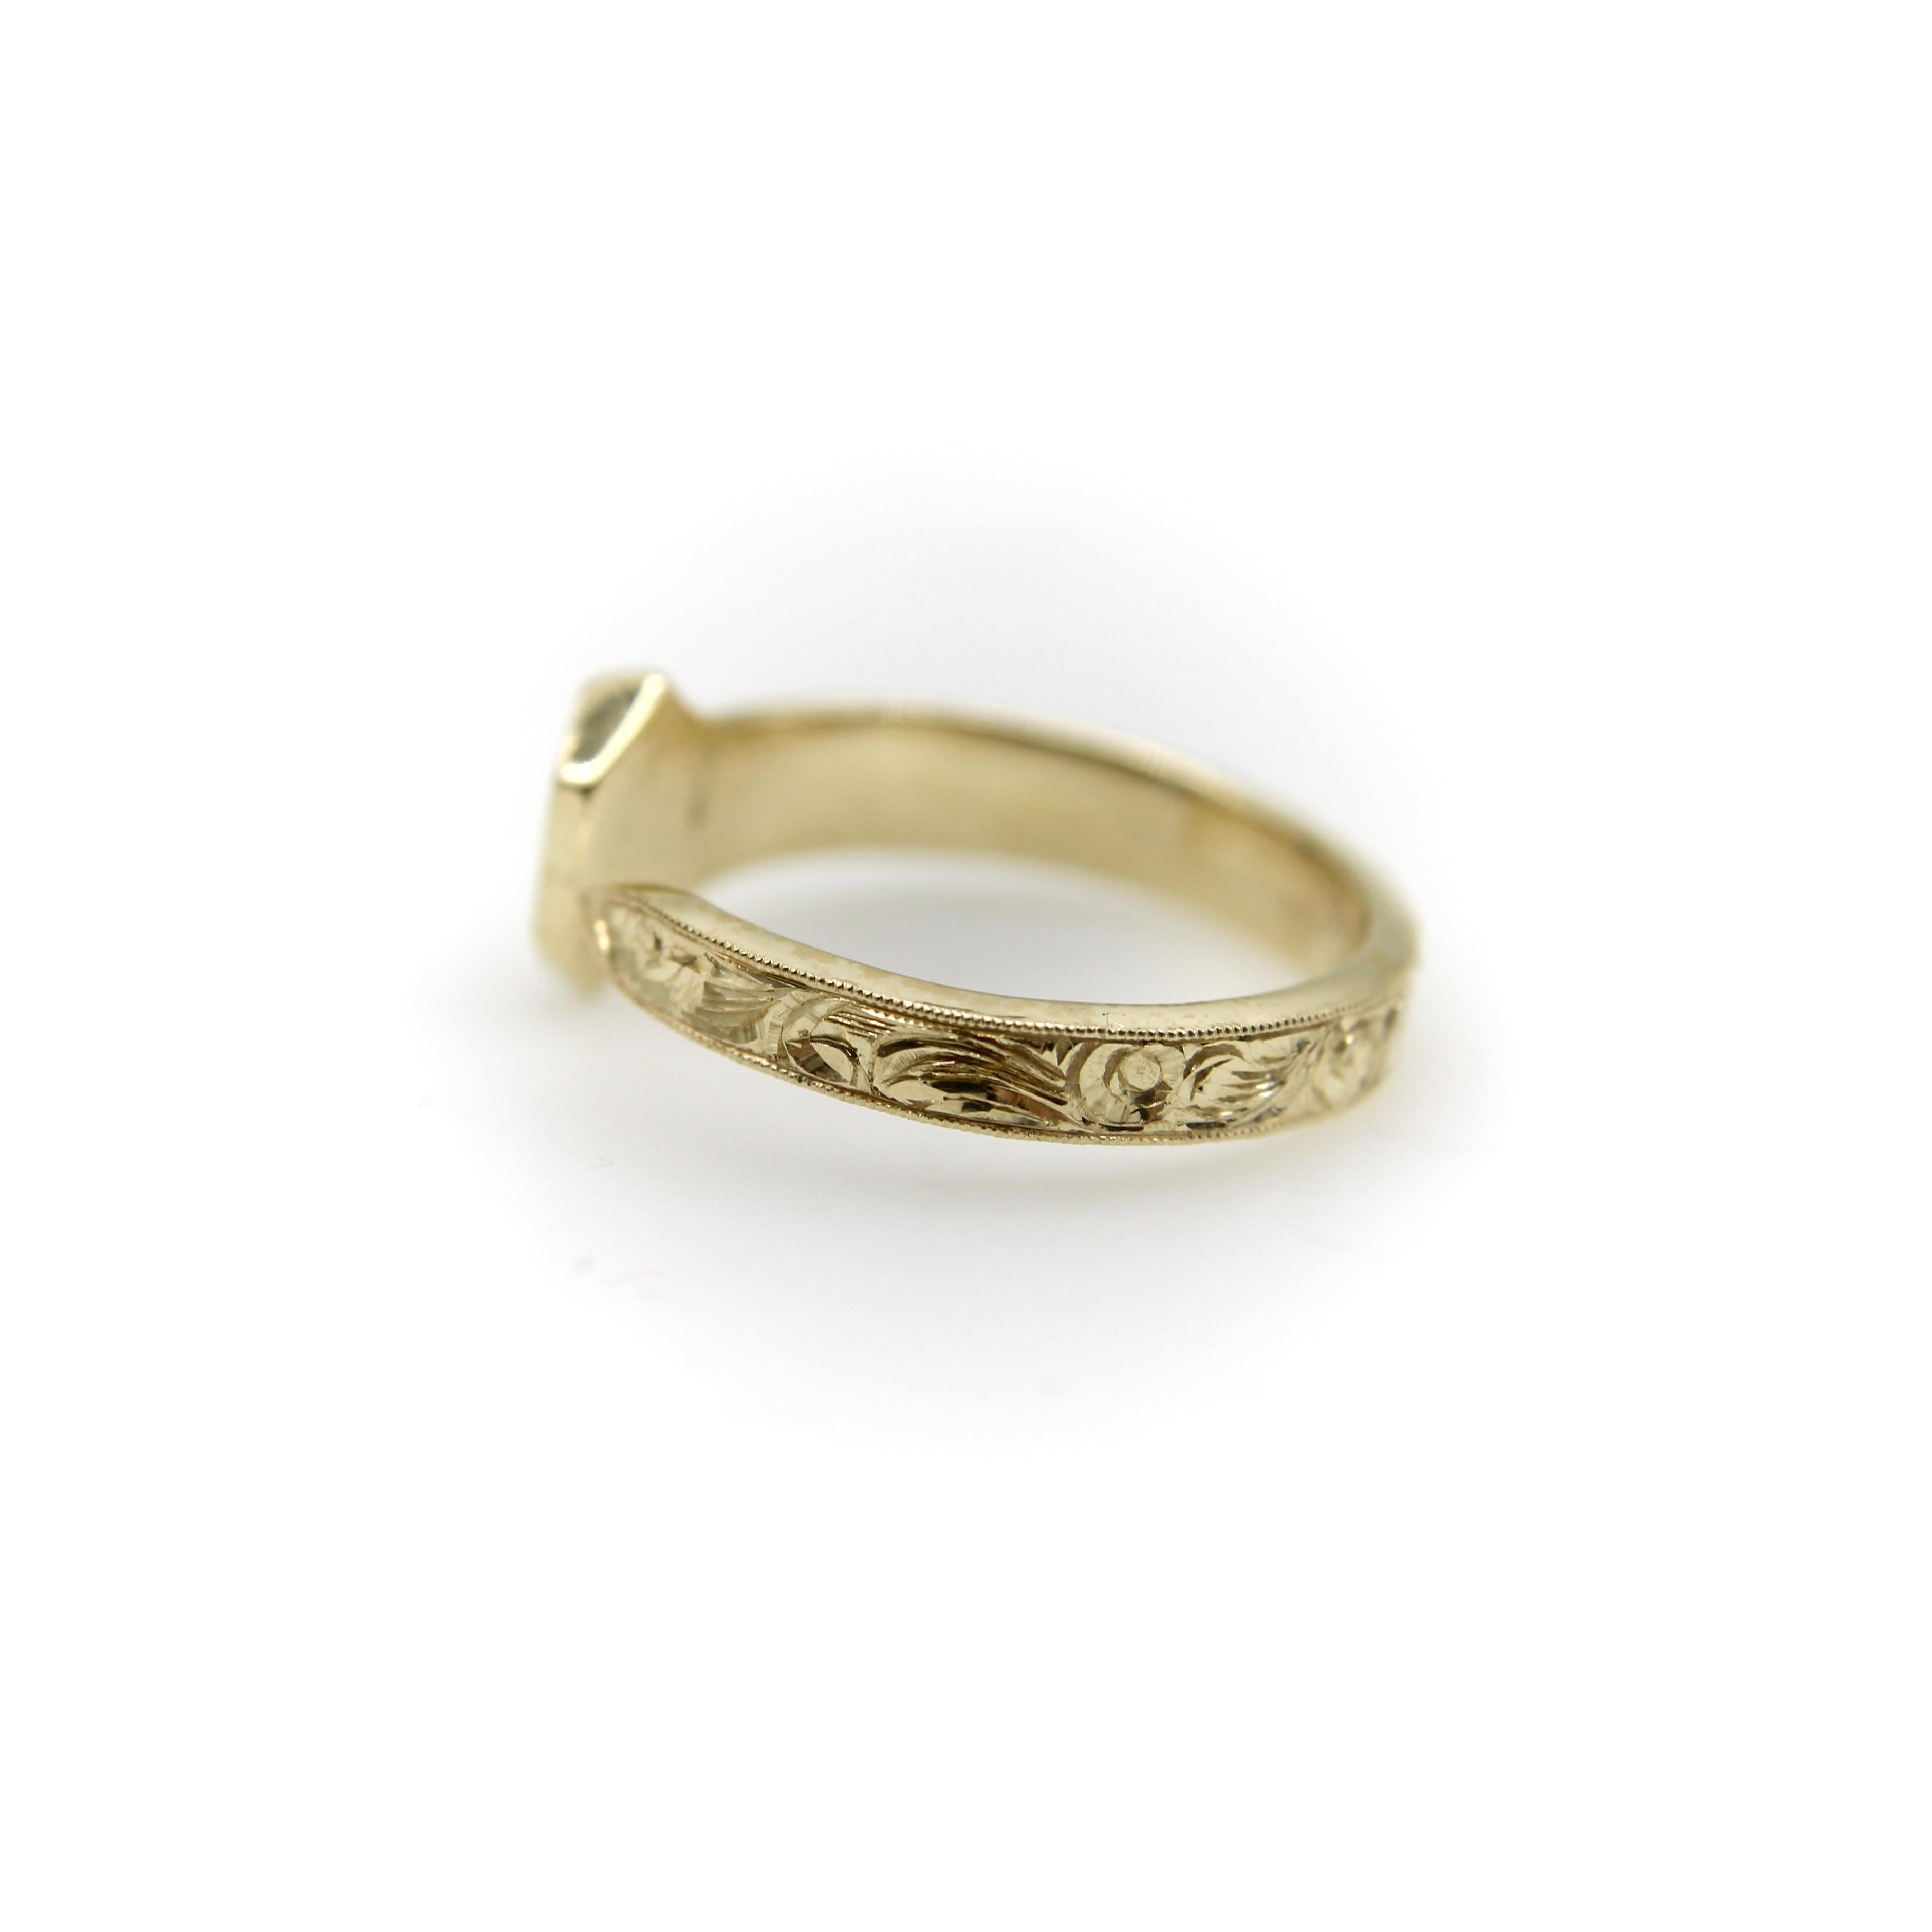 Round Cut 14K Gold Edwardian-Inspired Hand Engraved Nail Ring with Diamonds and Milgrain For Sale